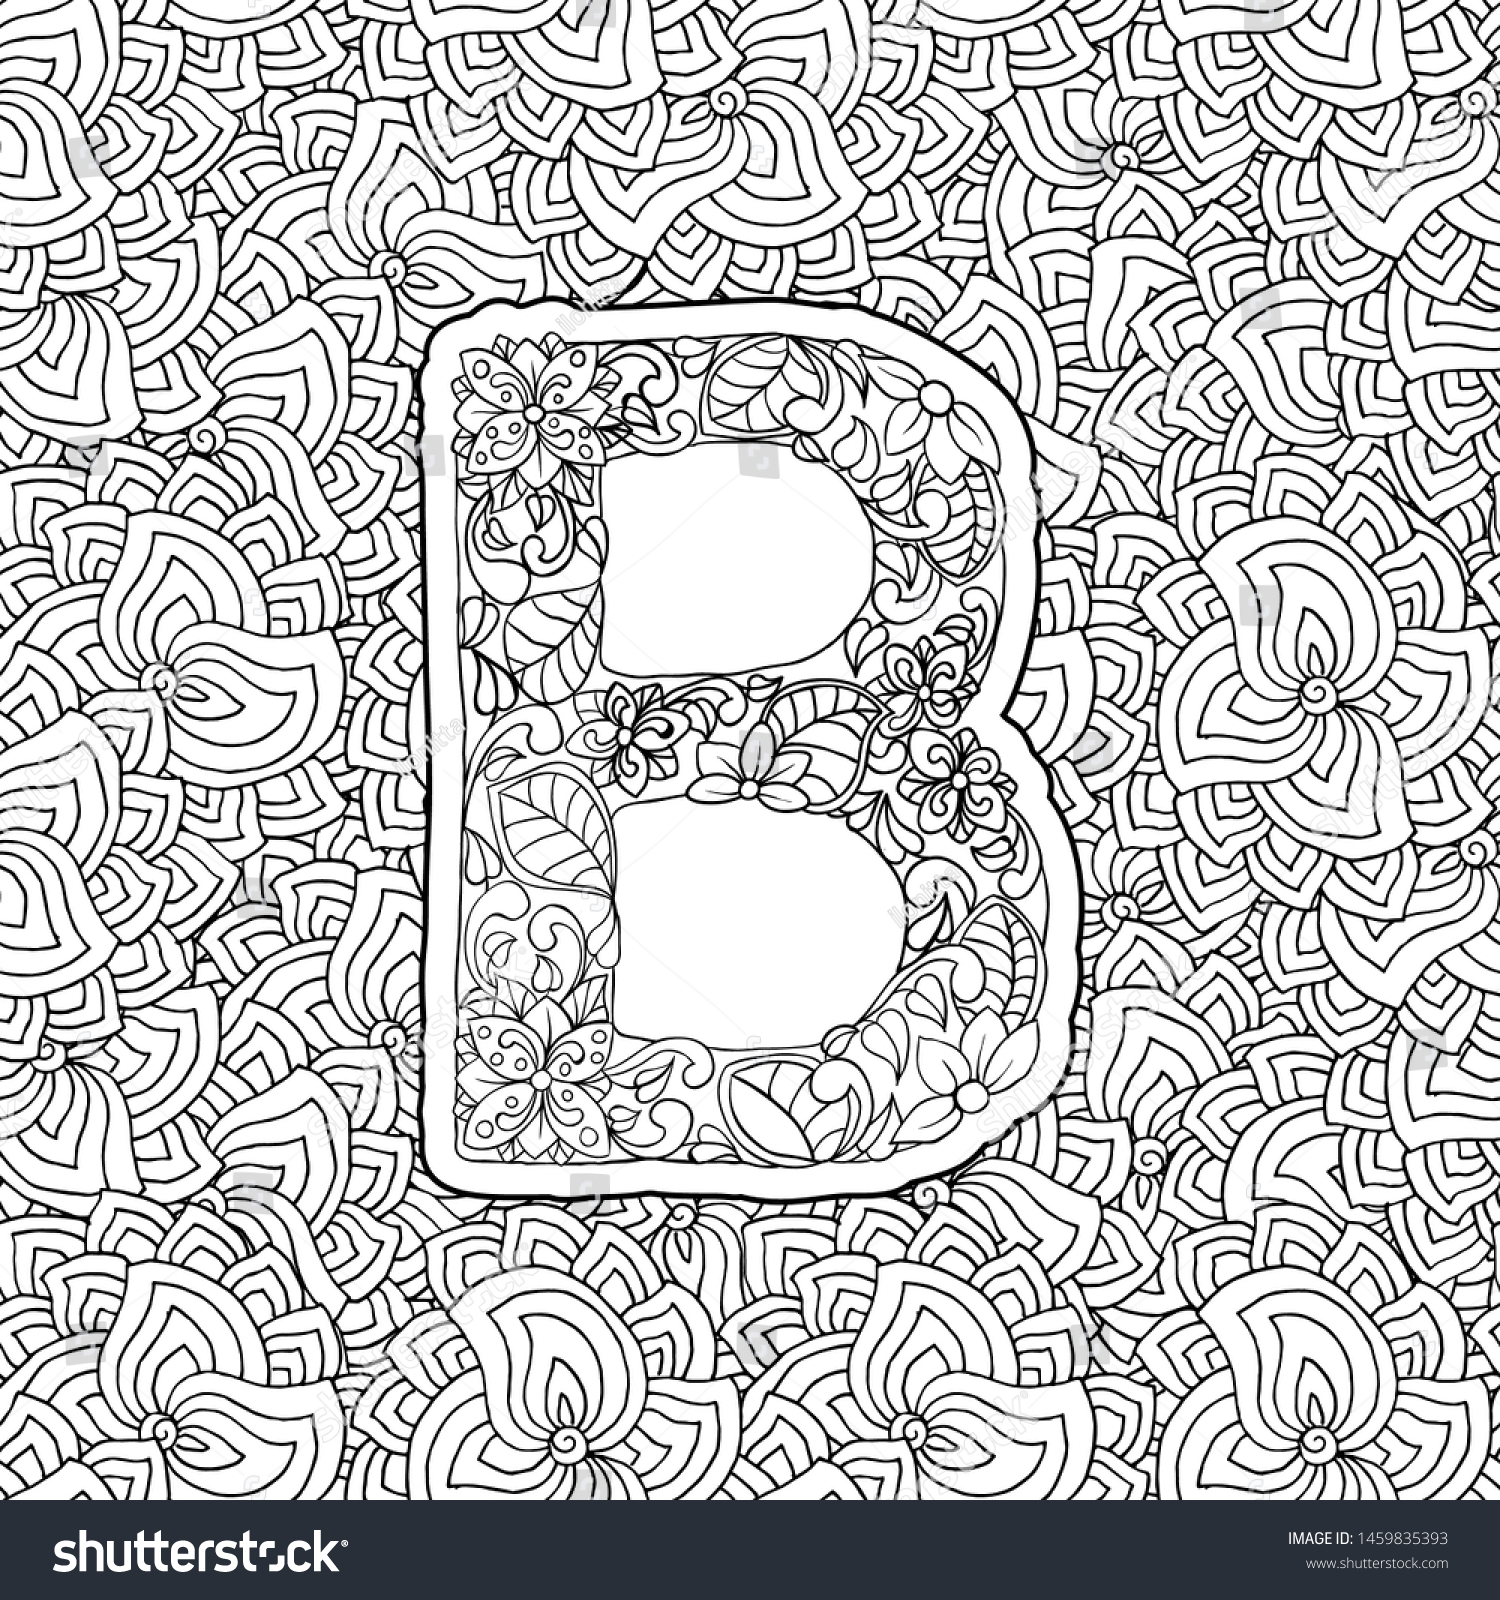 Coloring Book Floral Ornamental Alphabet Initial Stock Vector (Royalty ...